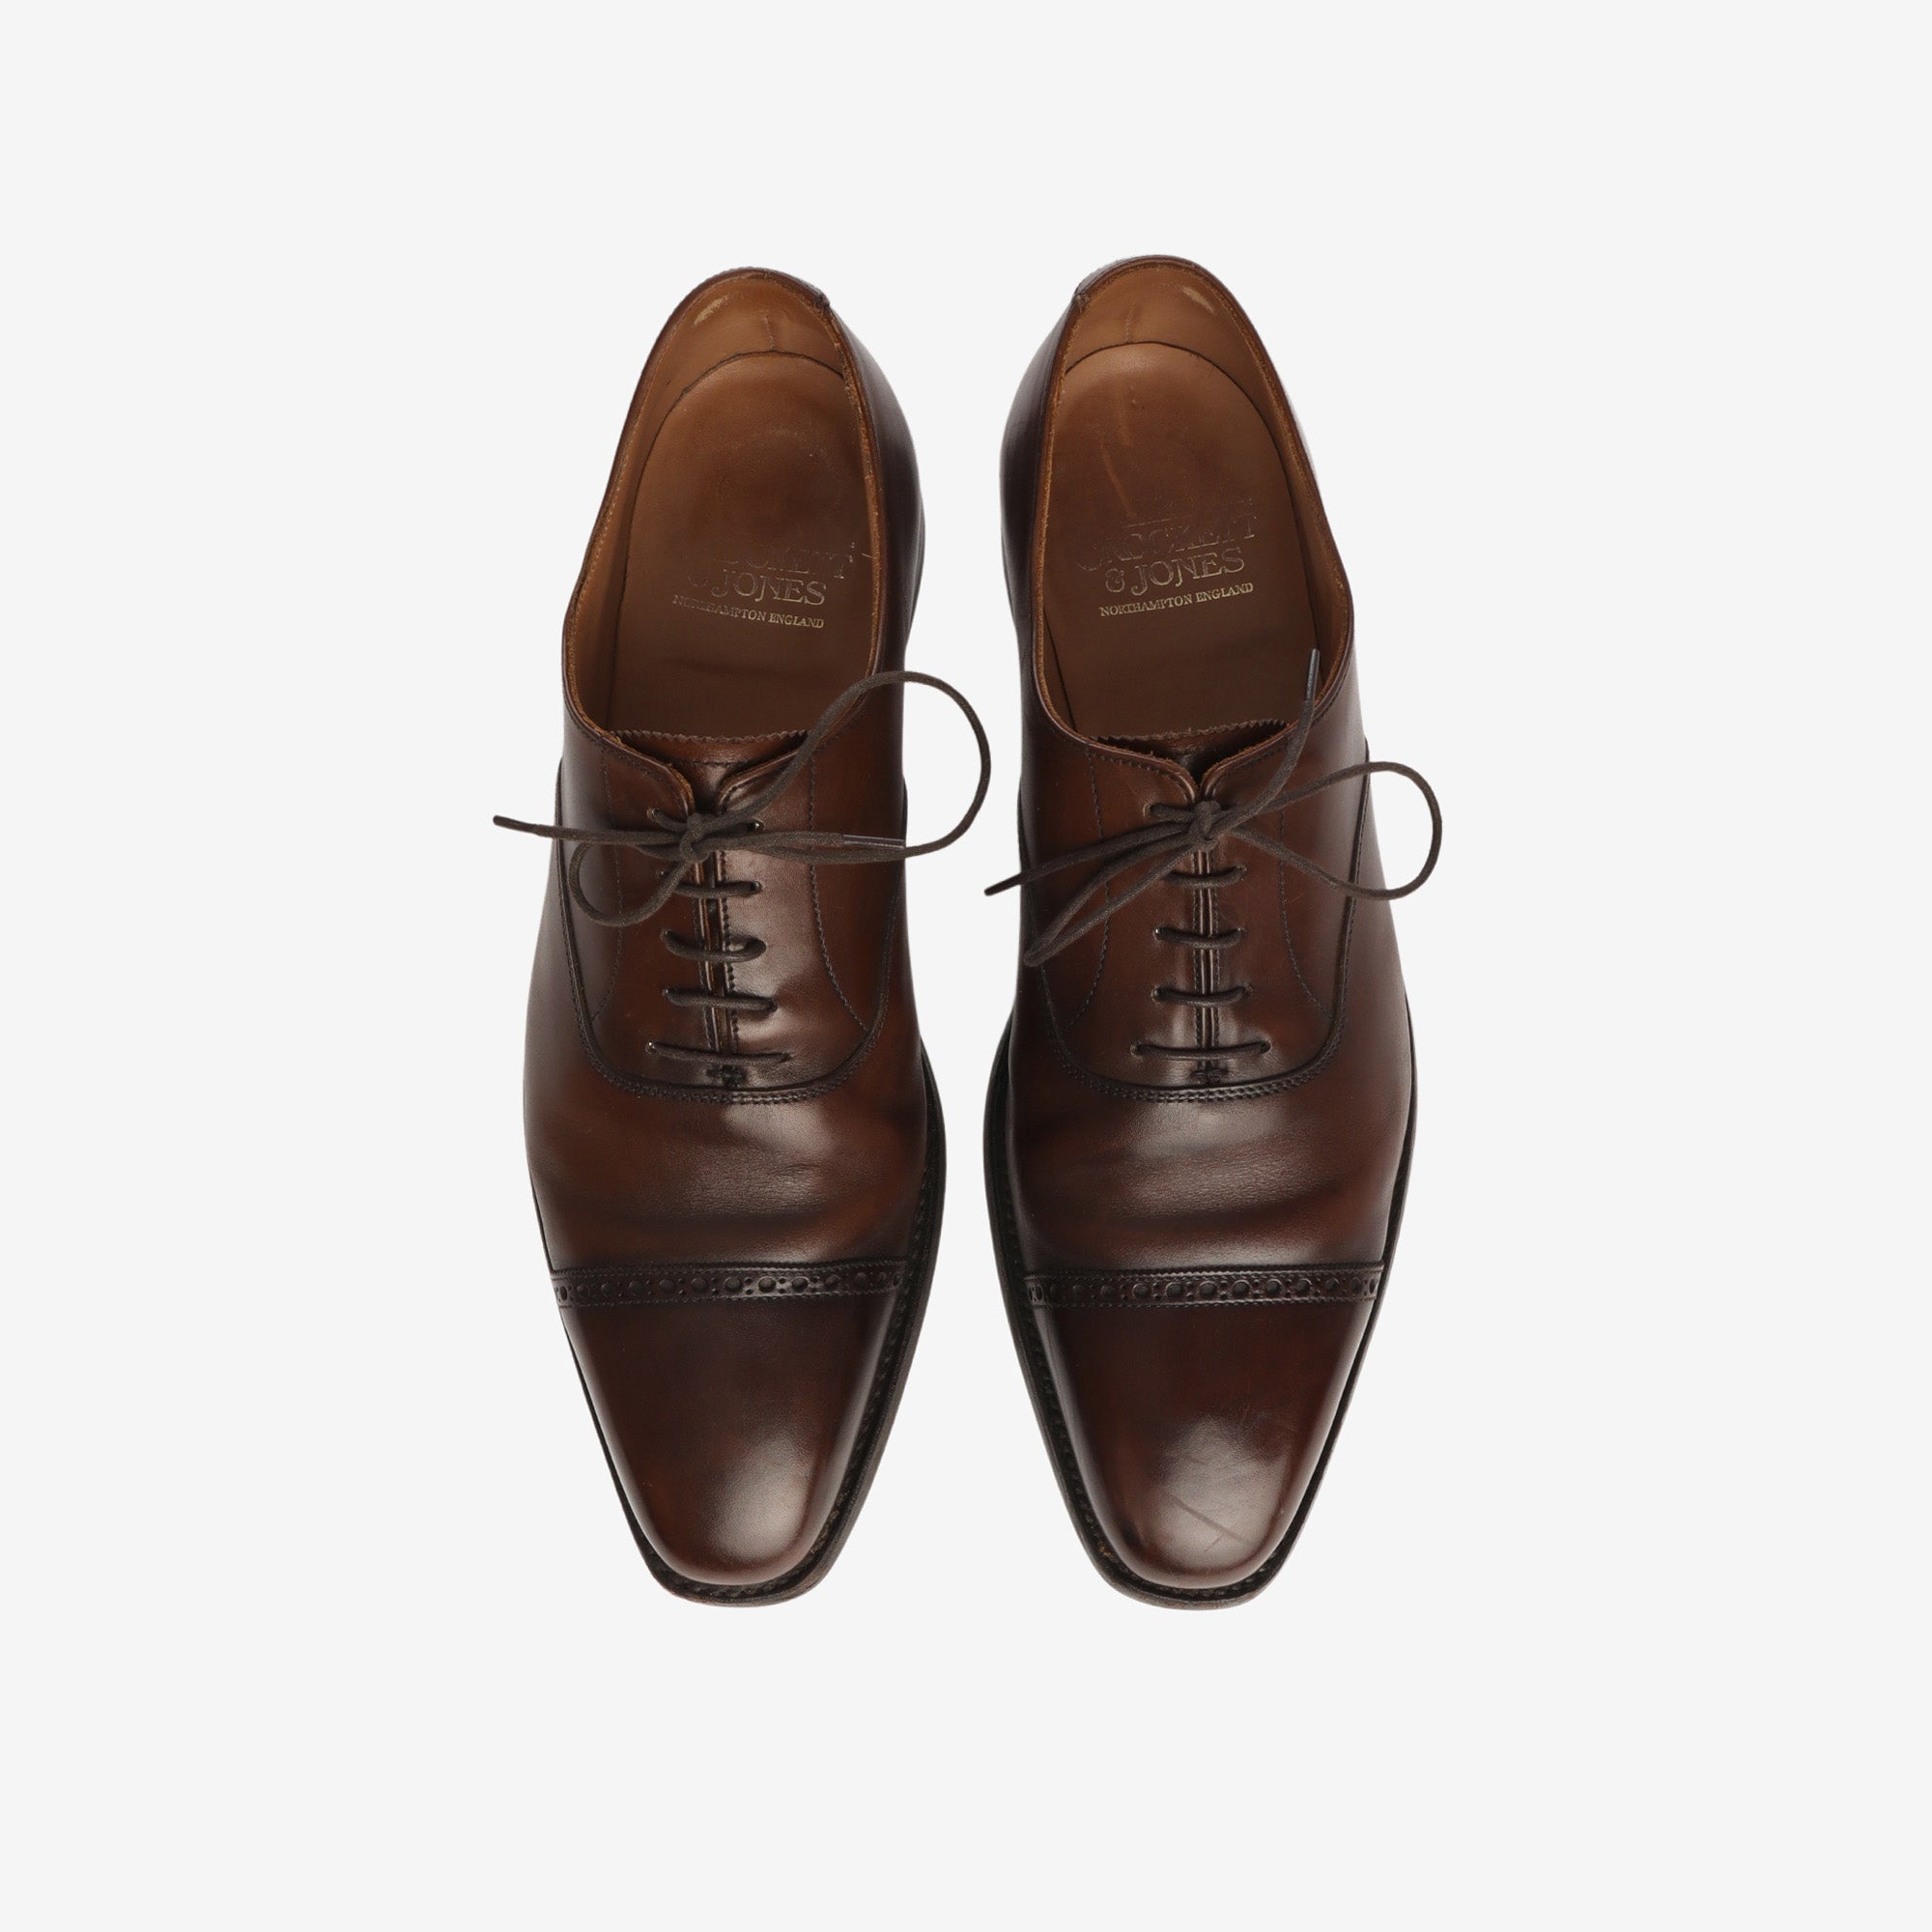 Arden Oxford Shoes